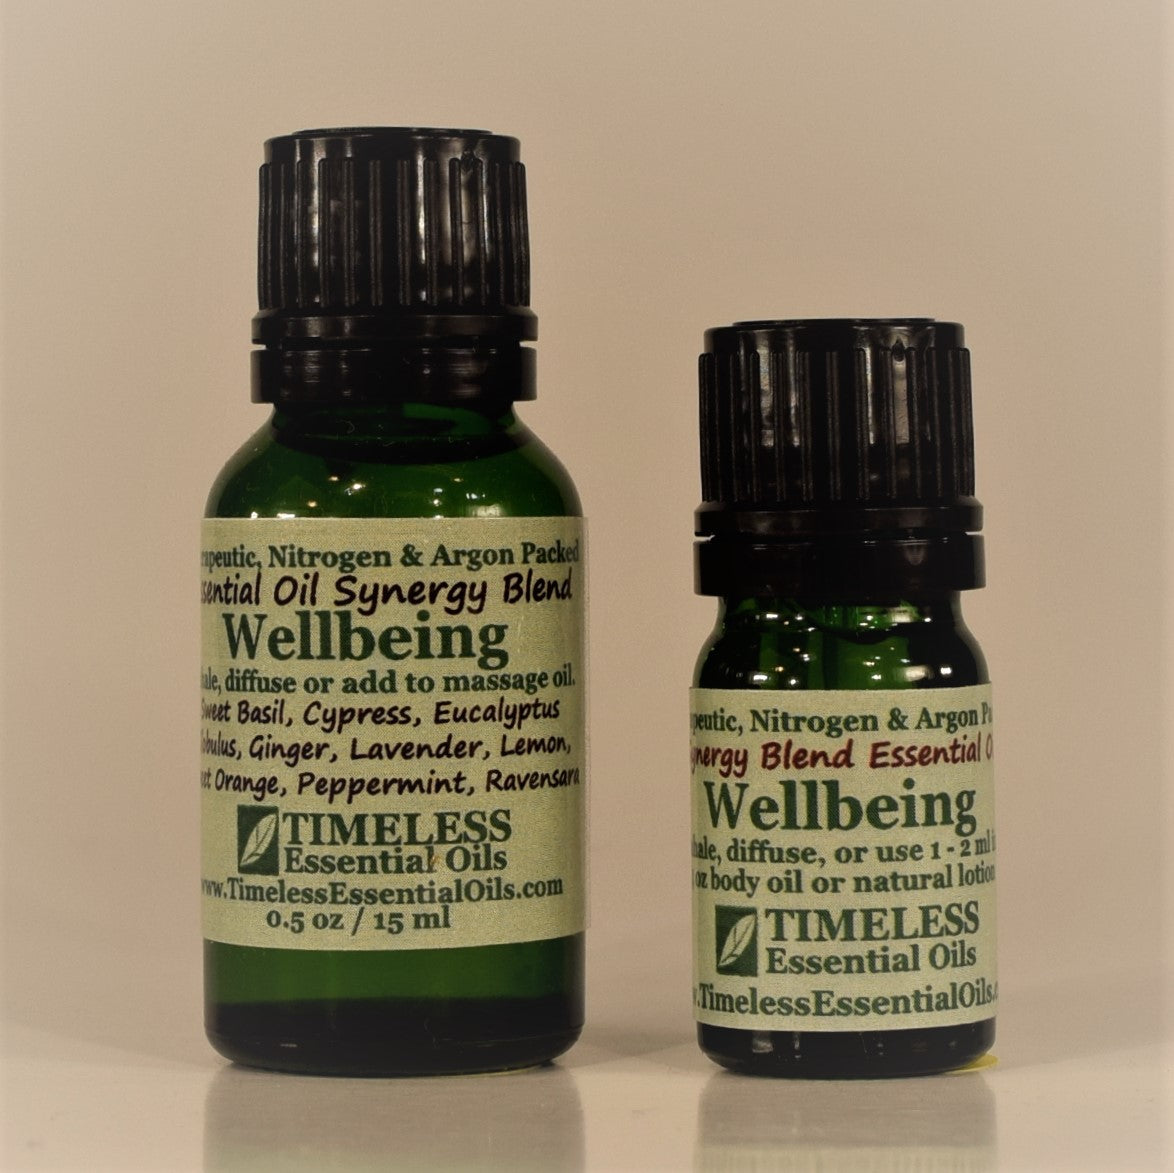 TIMELESS Essential Oils Wellbeing Synergy Blend promotes feelings of wellbeing, safety and contentment.